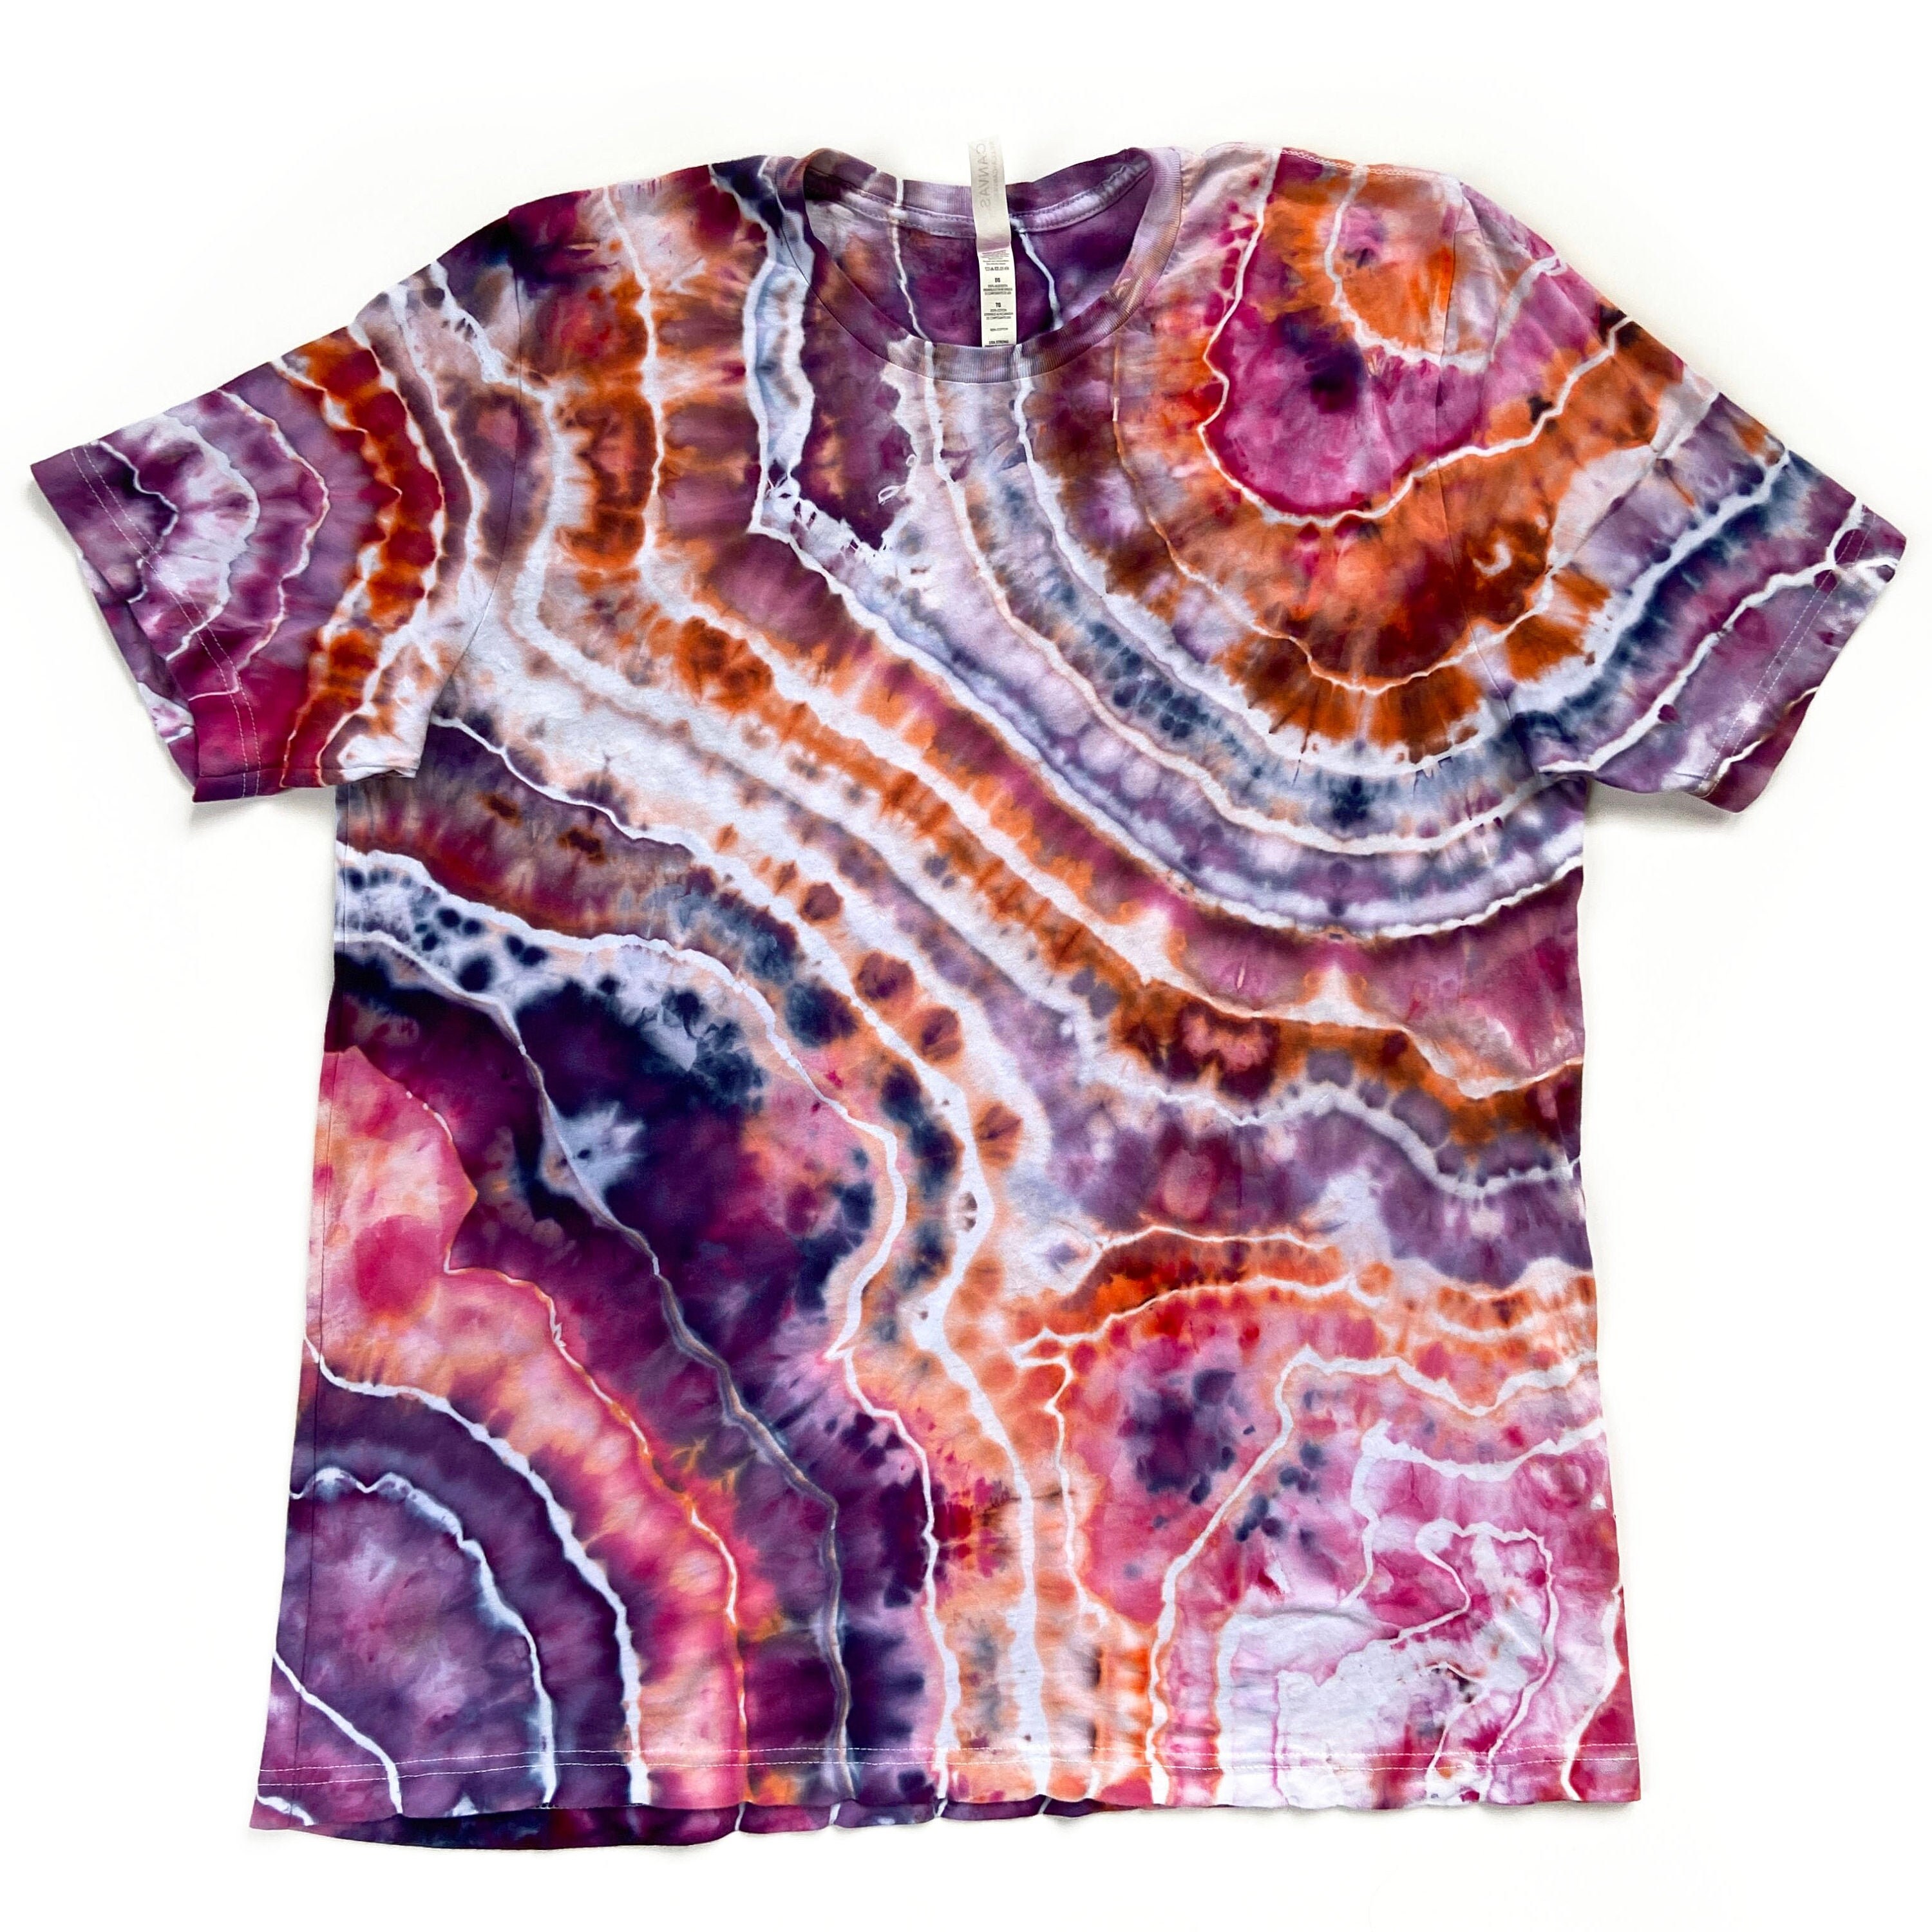 Geode Tie Dye T-Shirt Short Sleeve Ice Dye Orange Adult Pink Large Hand Dyed Unisex Cotton Bright Colors Hippie